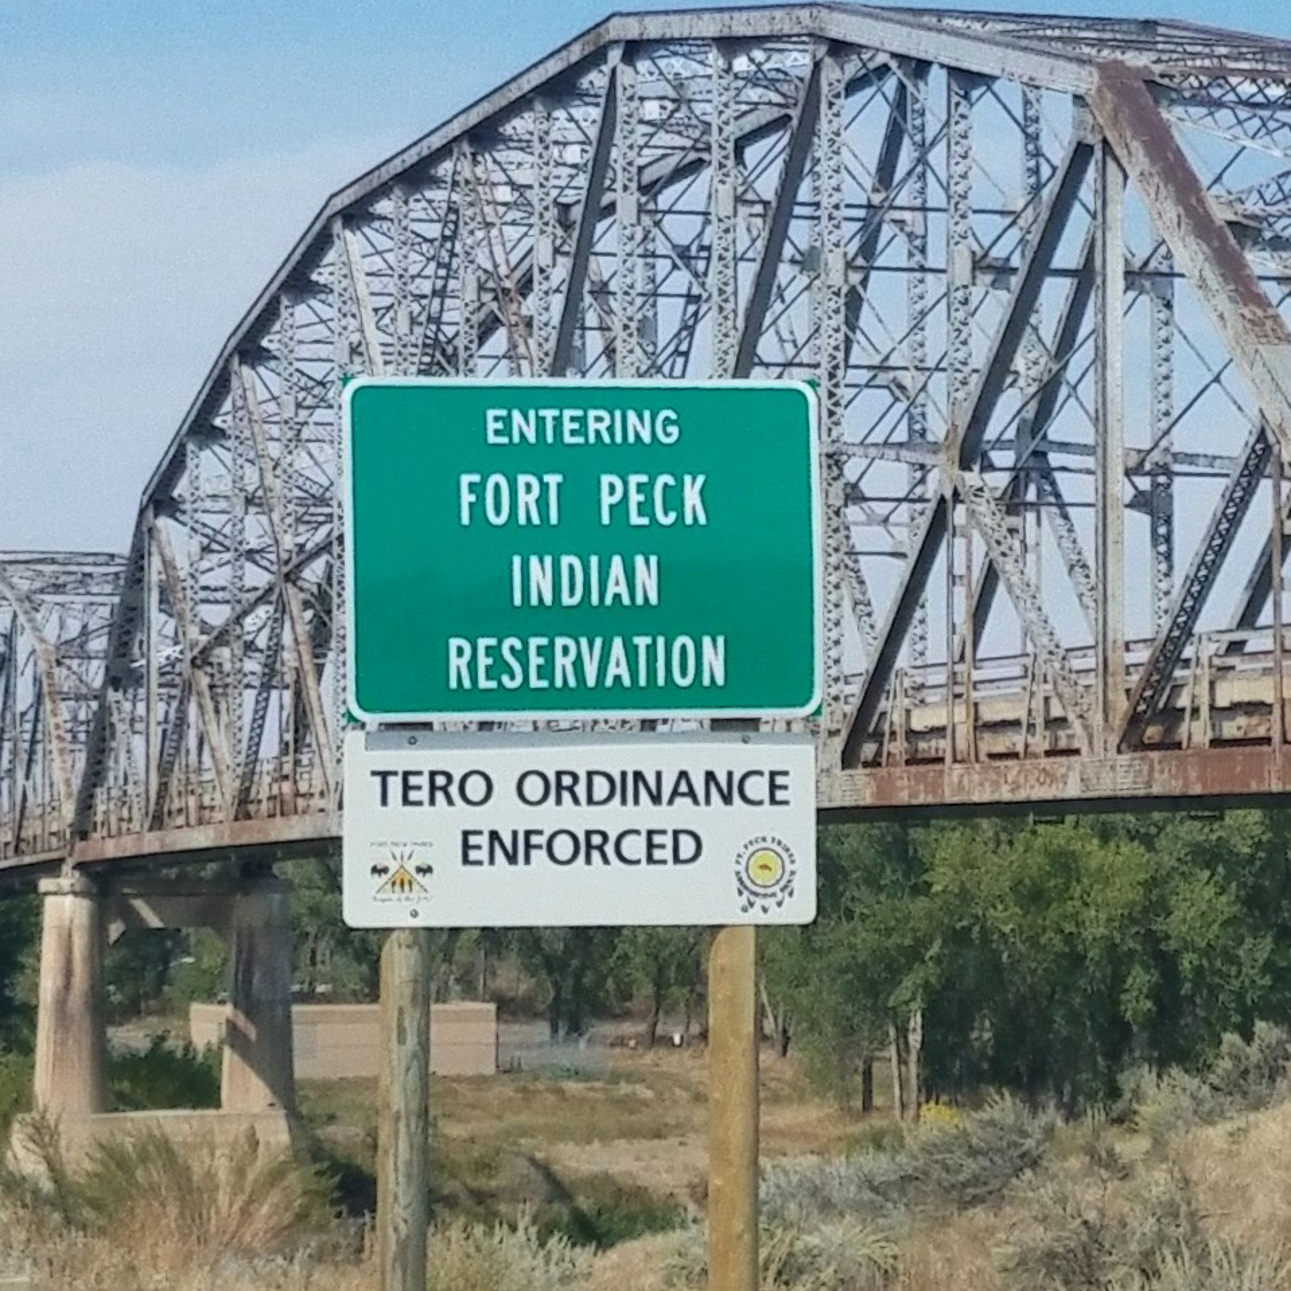 A picture of the Fort peck Reservation sign